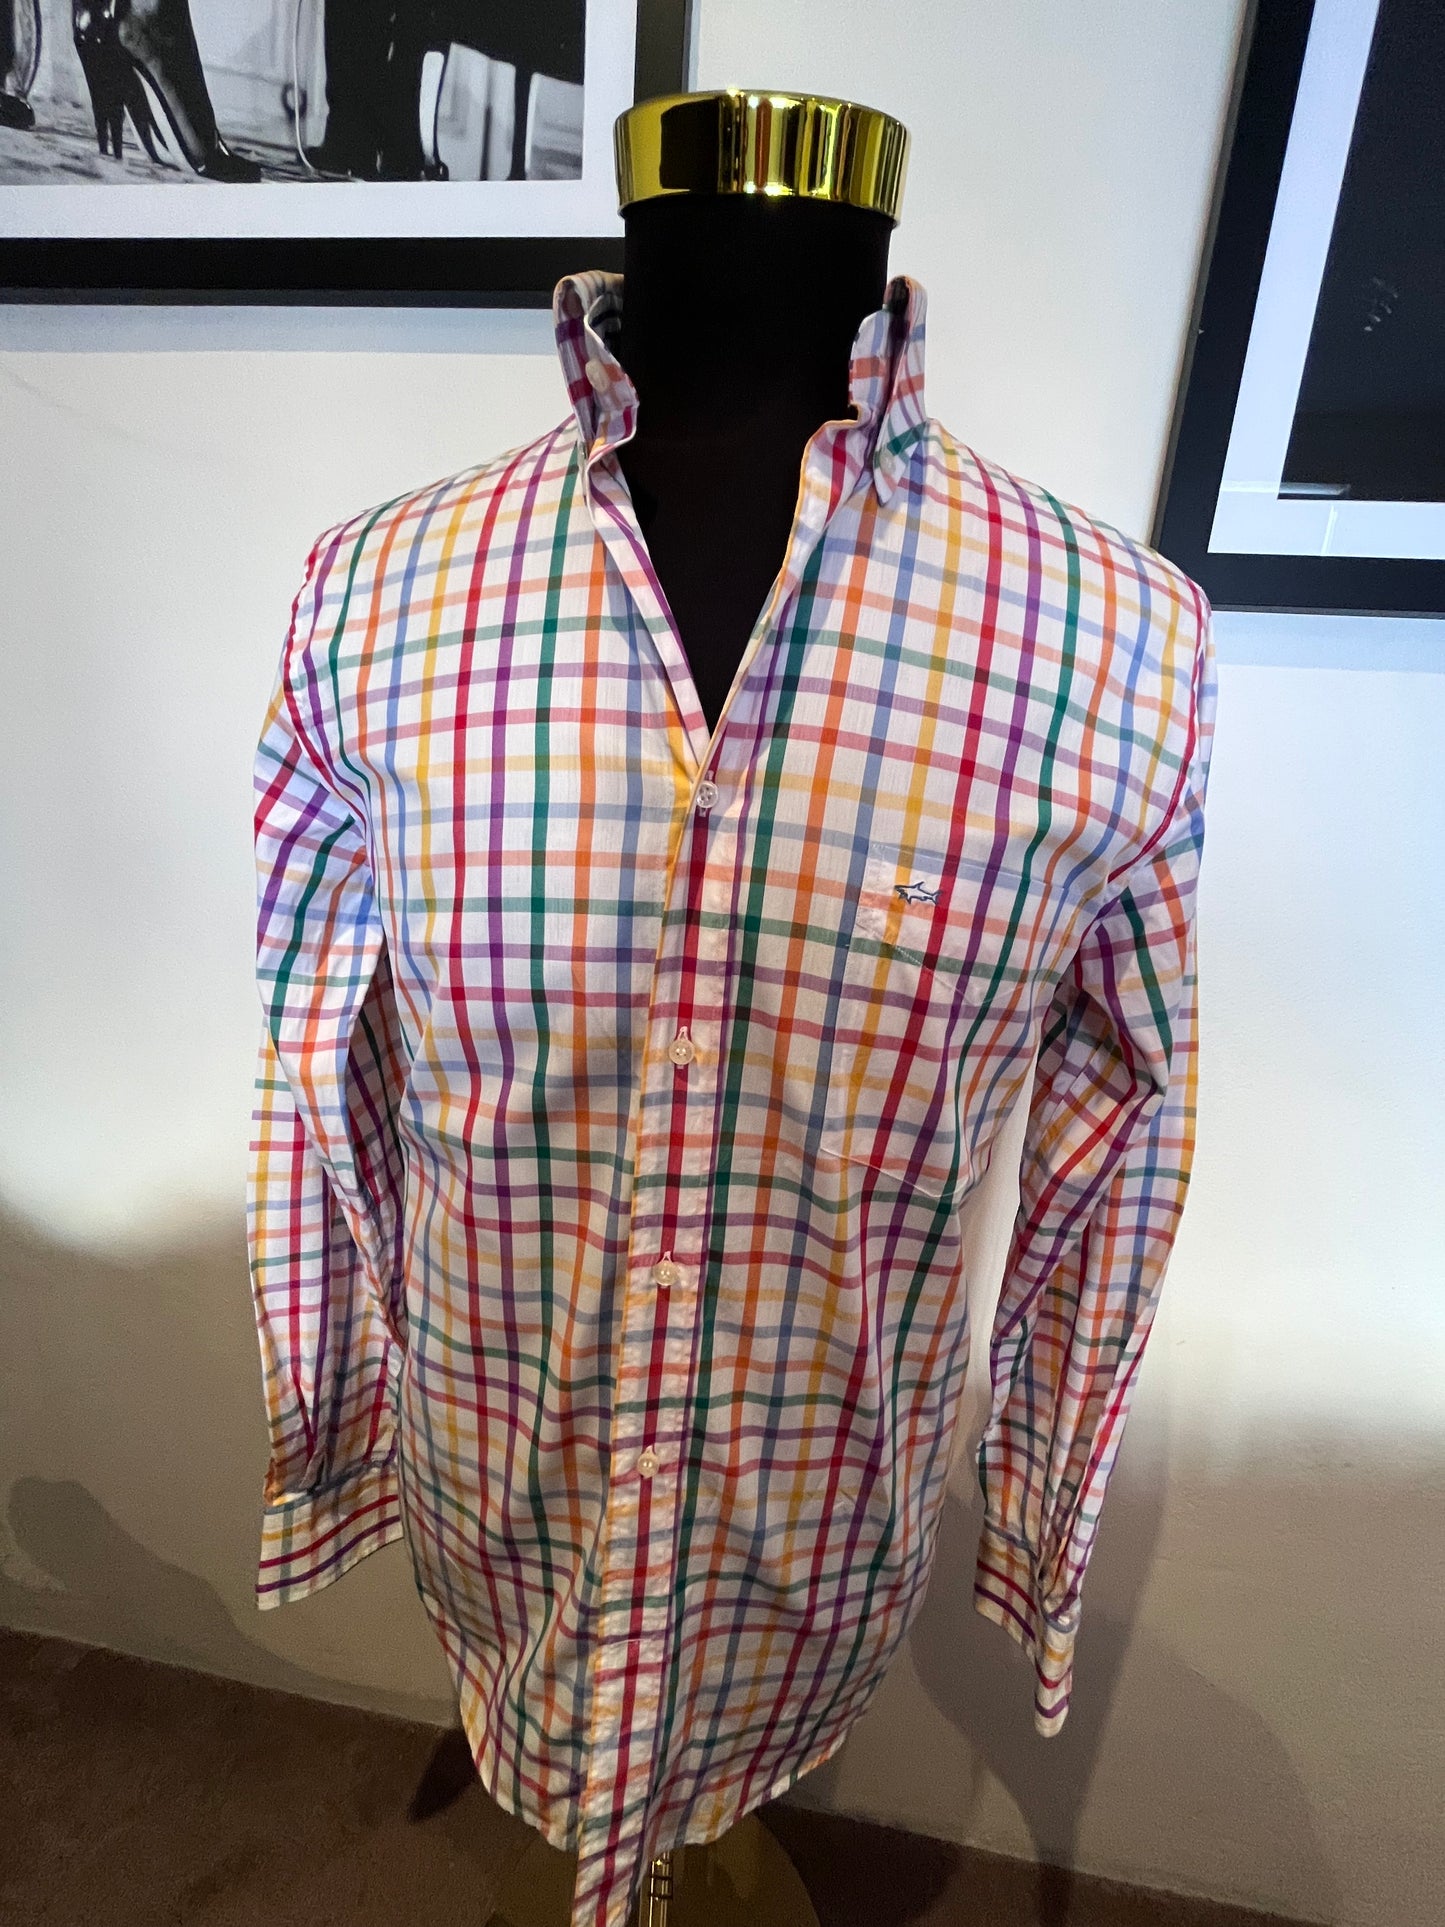 Paul & Shark 100% Cotton White Check Shirt Size 40 Medium Made in Italy